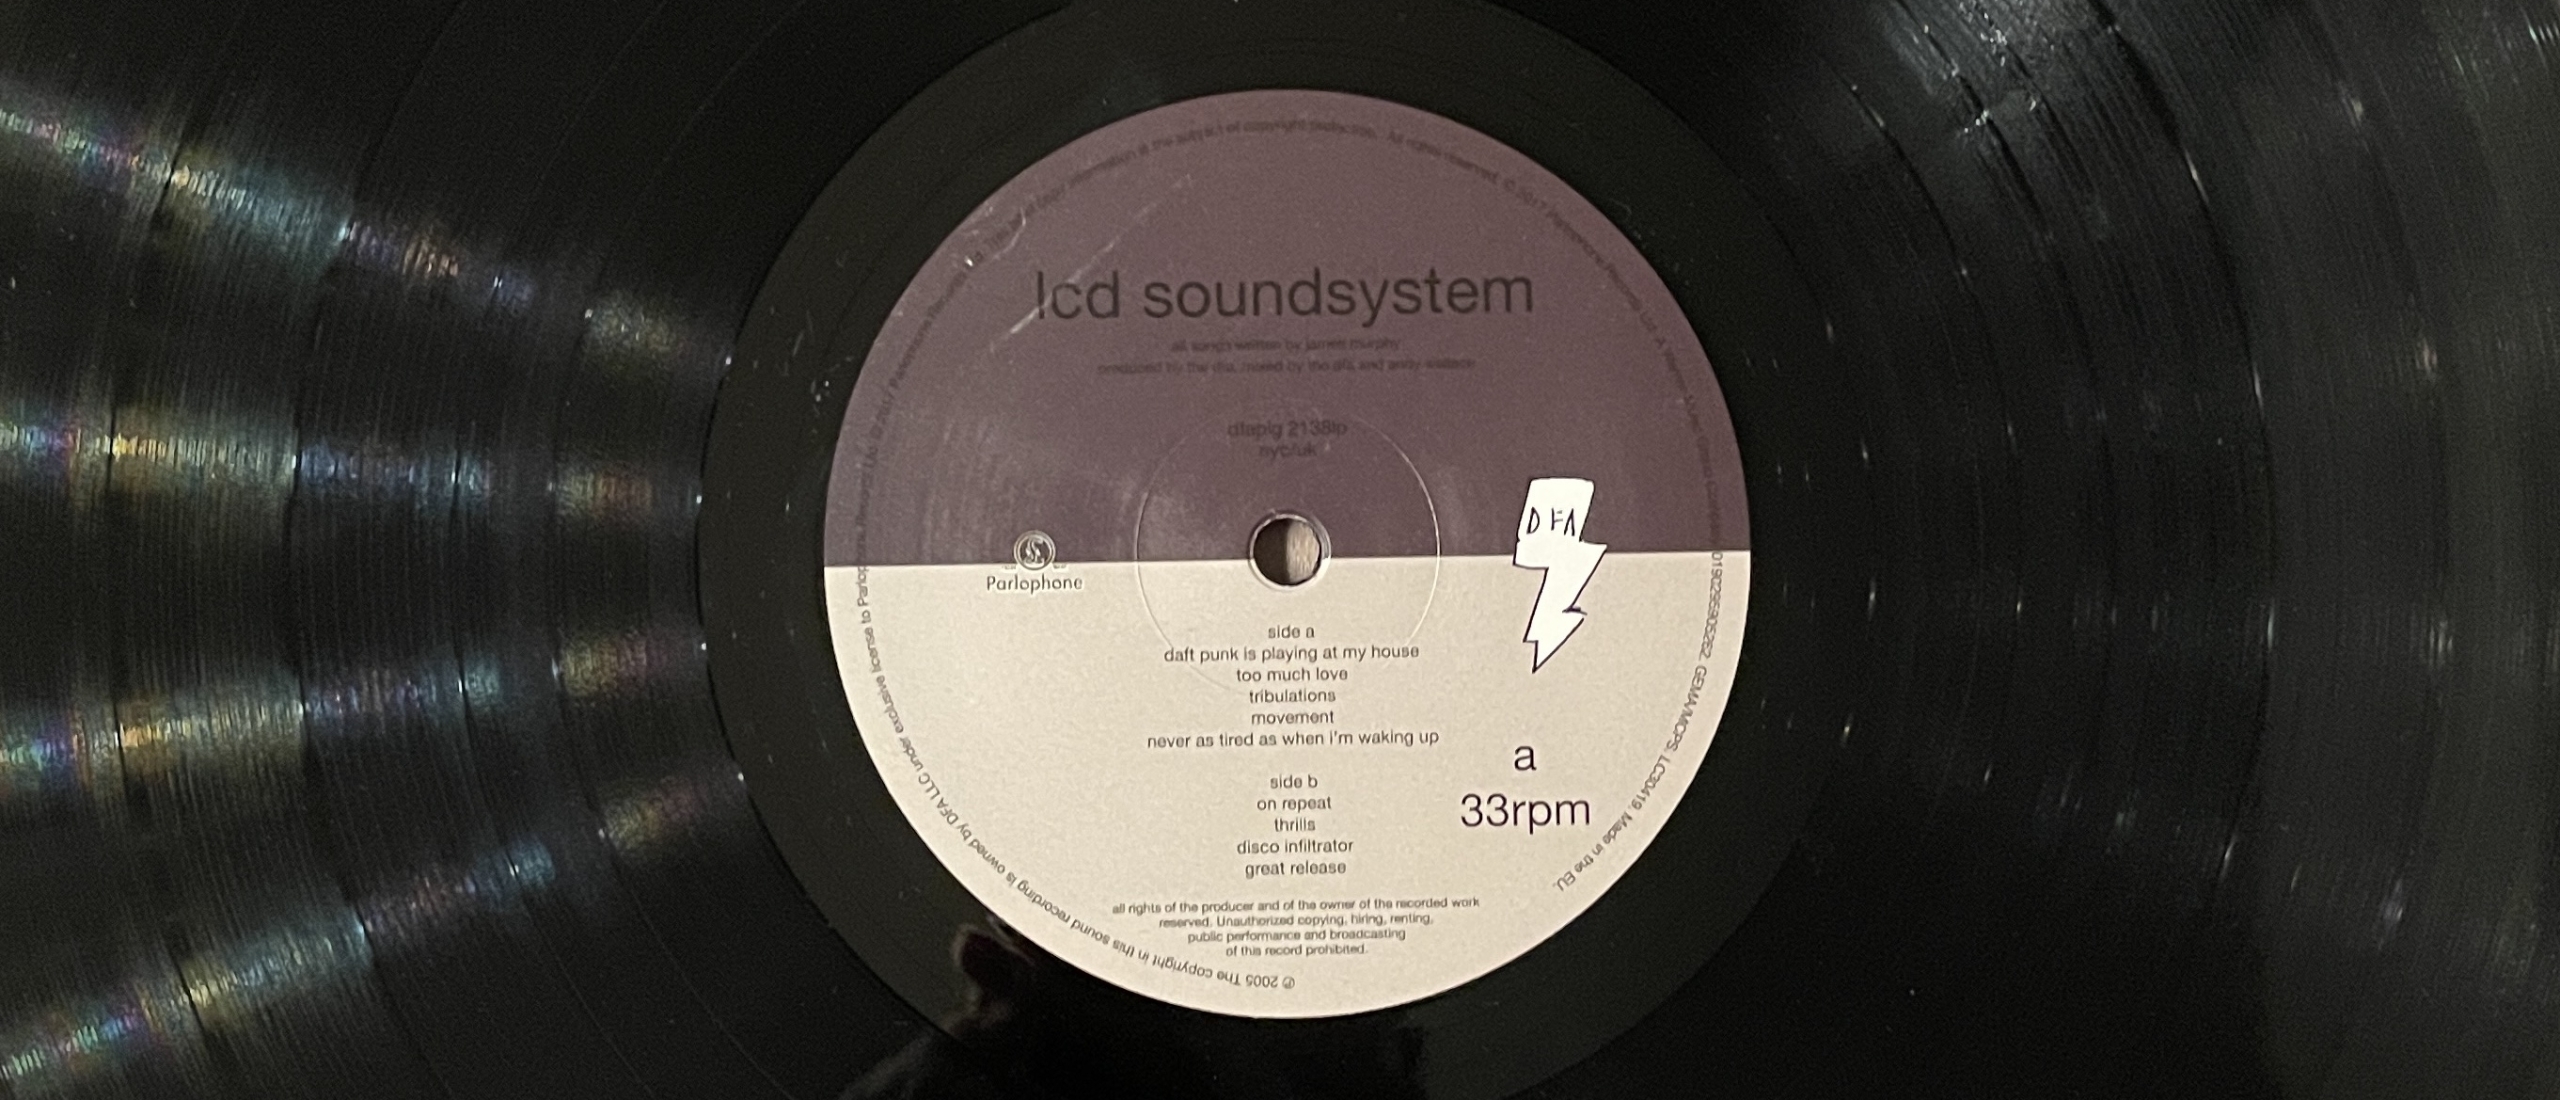 Forgotten Song Friday LCD Soundsystem met Daft Punk Is Playing At My House